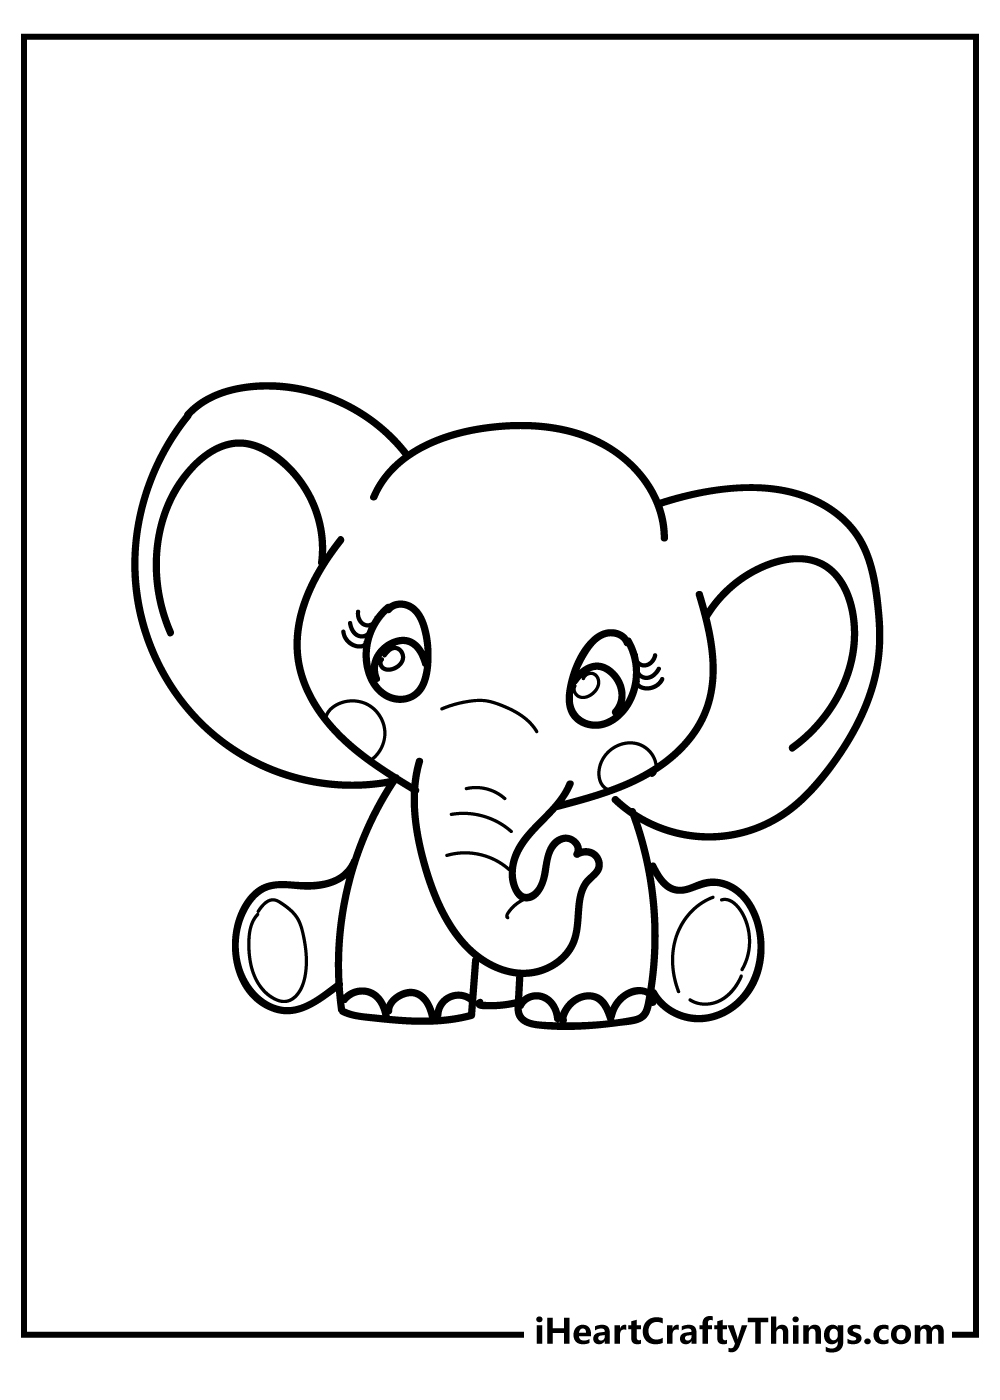 cute animal coloring pages free printable